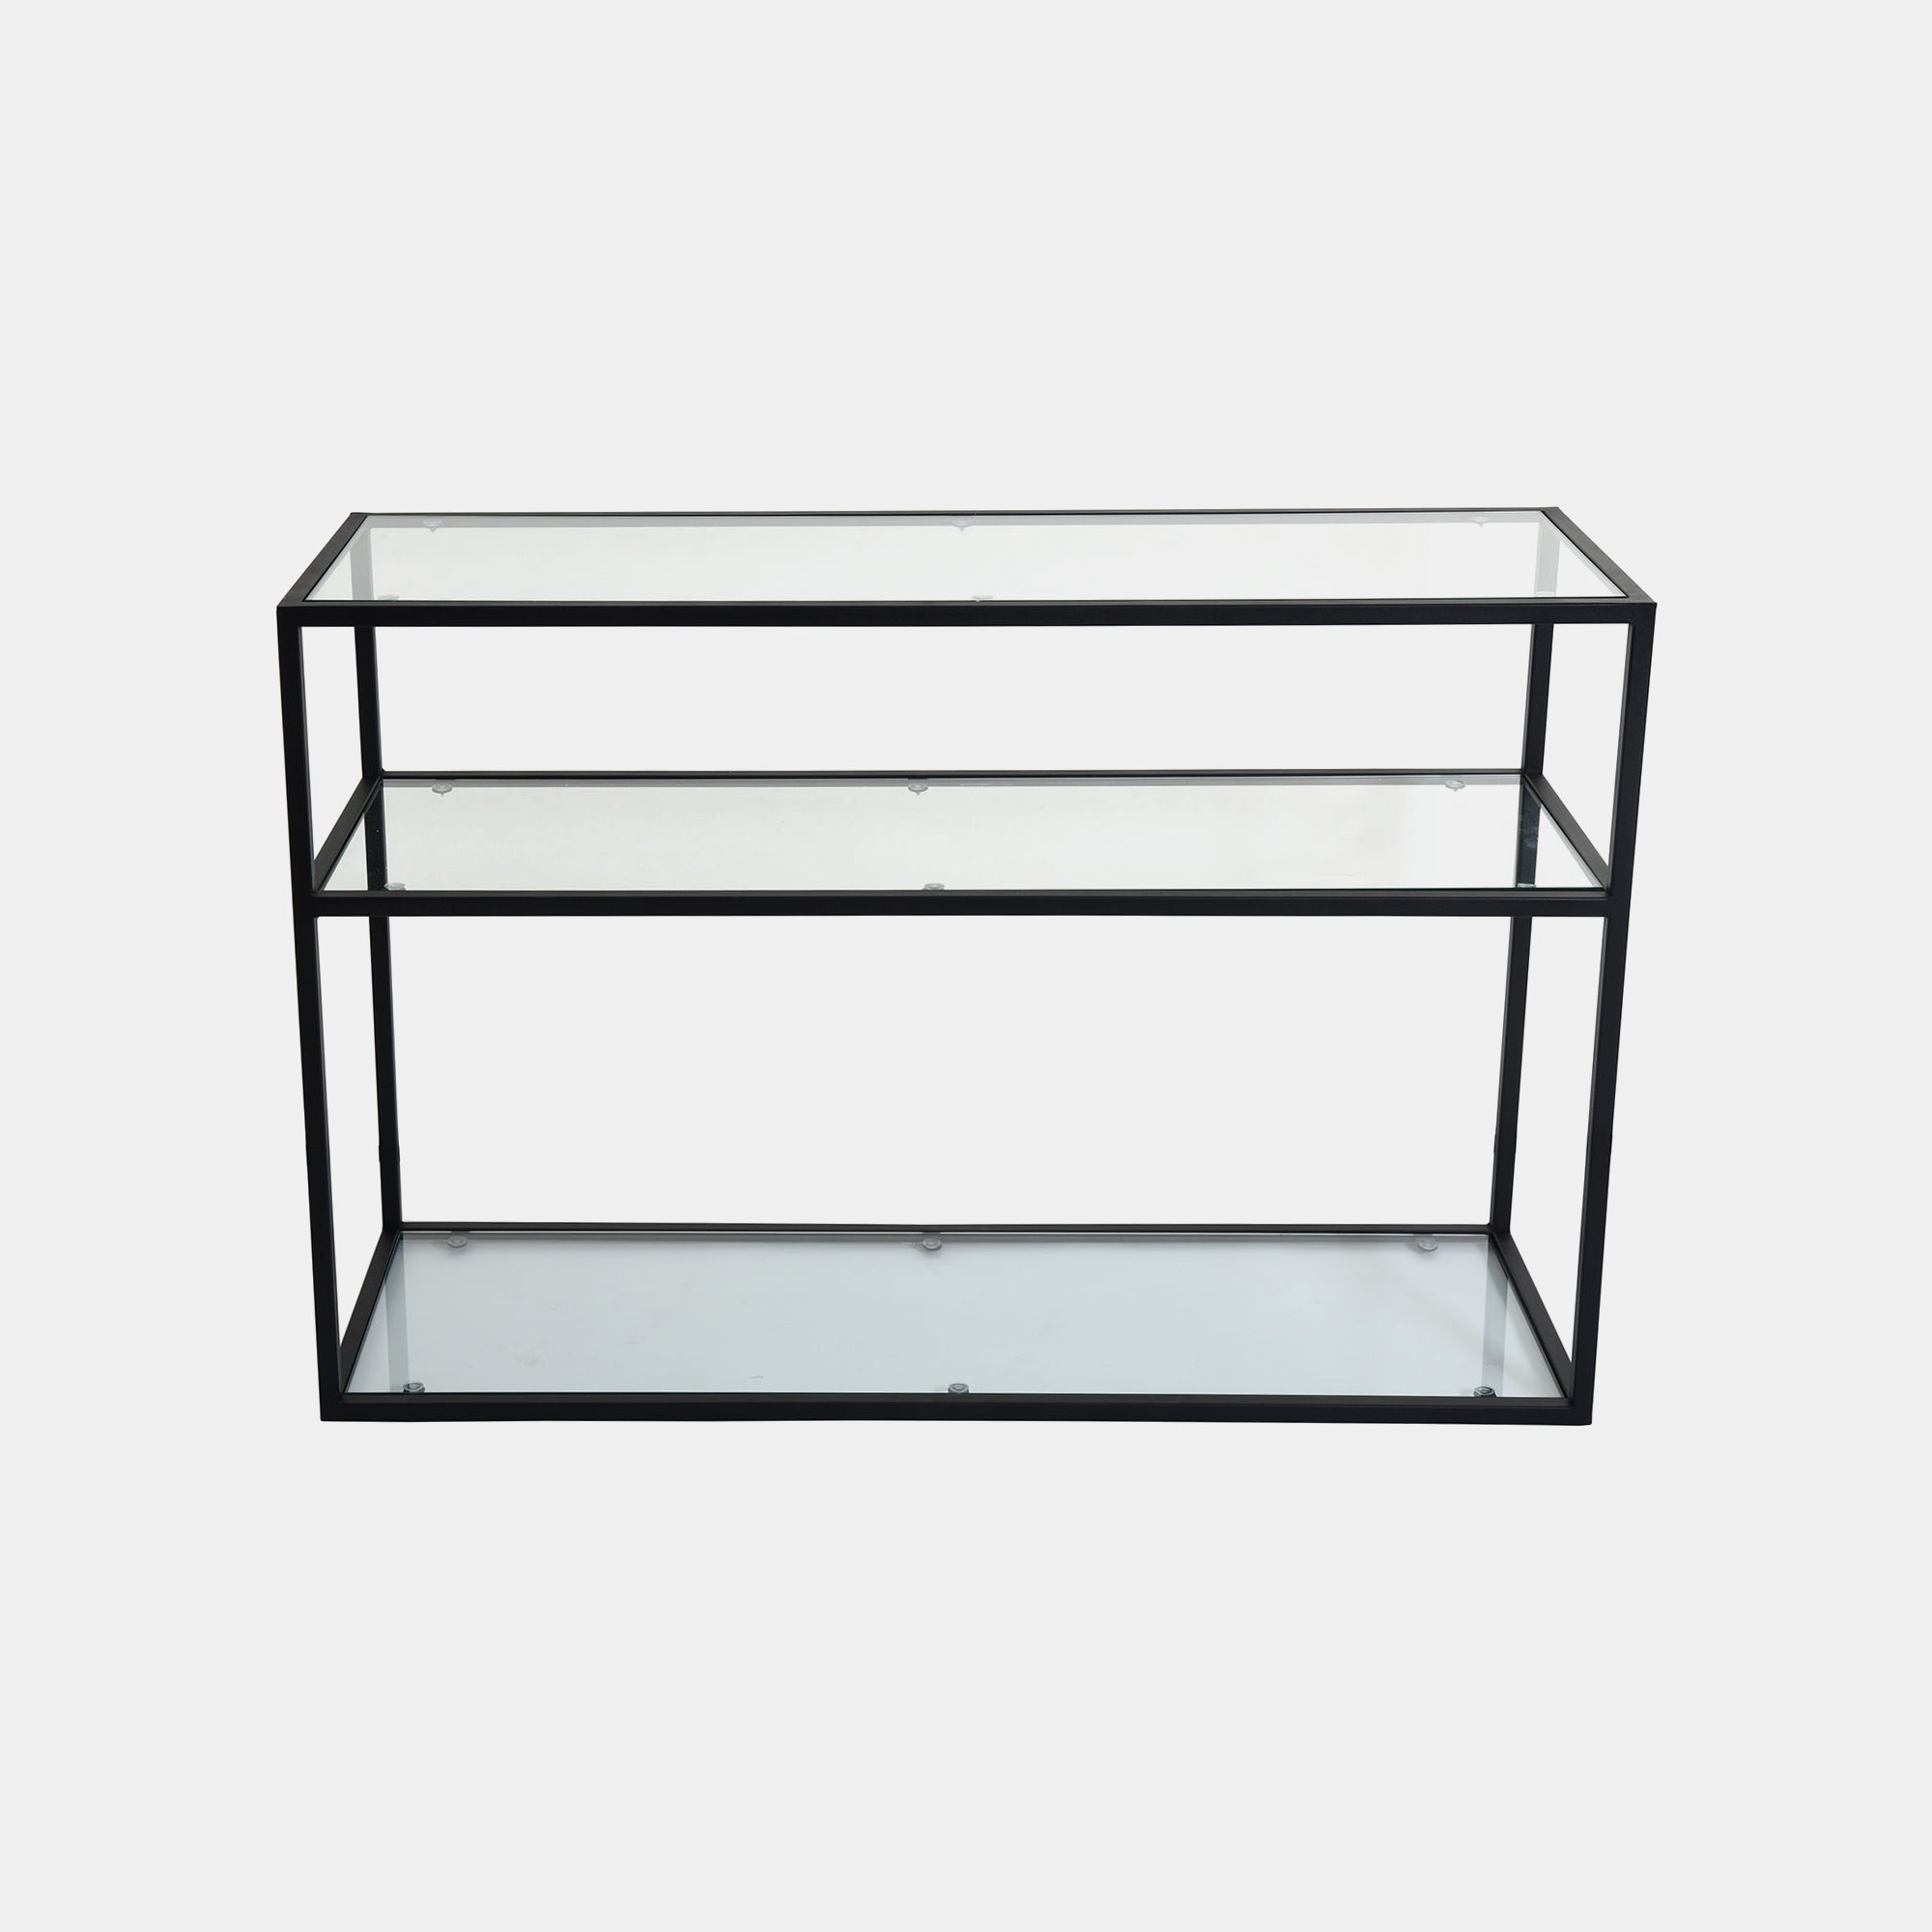 Padua - 120cm Console Table With Black Steel Frame & Clear Glass Top